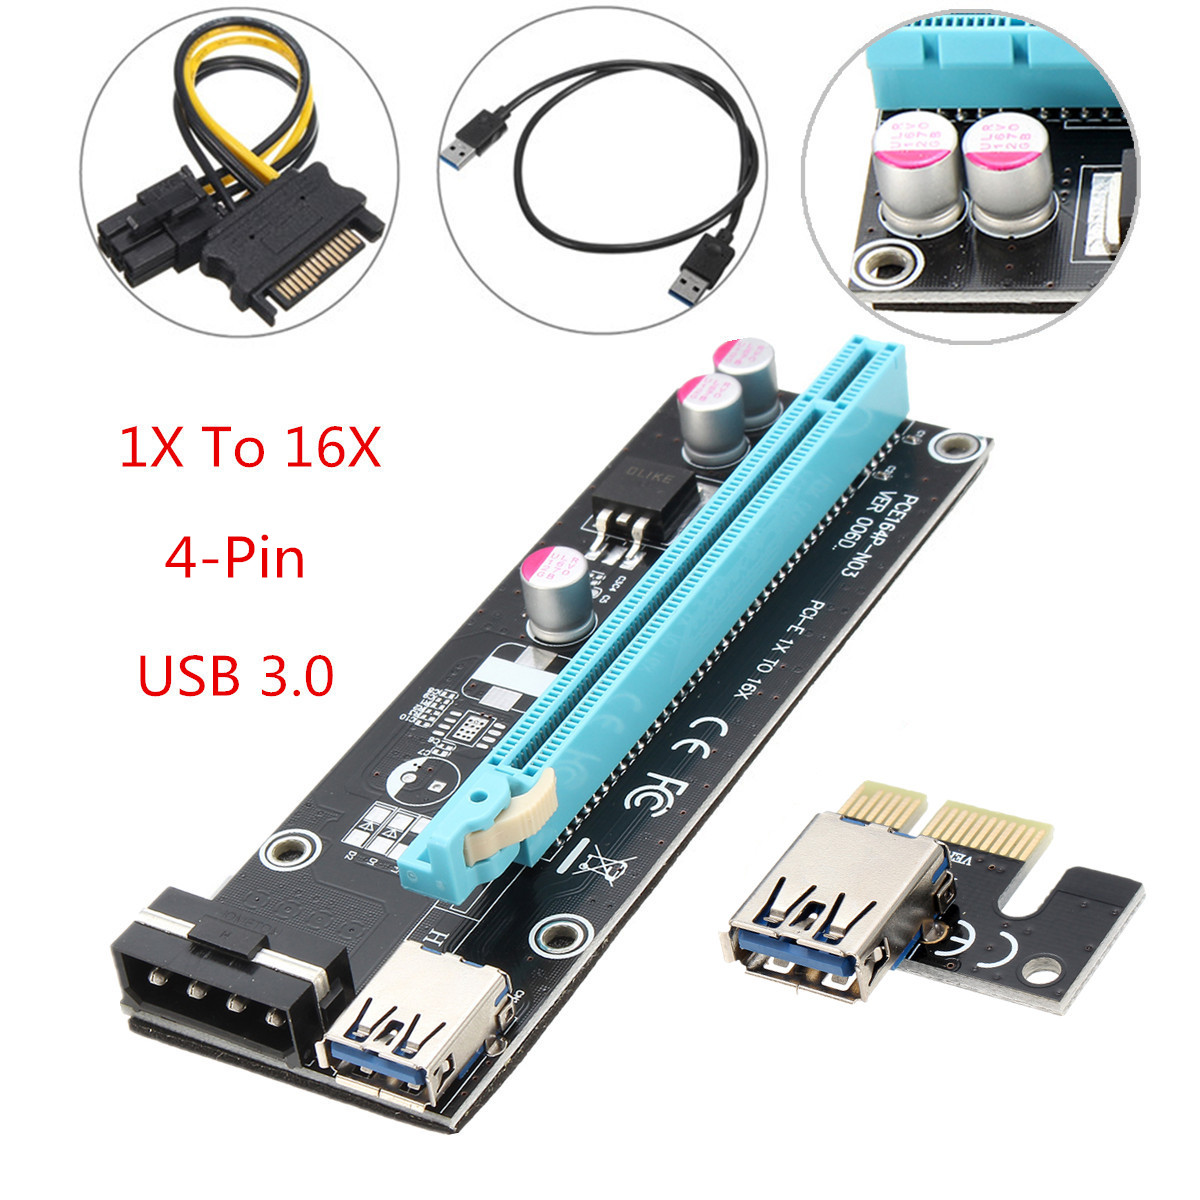 PCIE-Mining-Cable-1X-to-16X-Graphics-Card-Extension-Cable-PCI-E-Anti-burn-Design-USB30-External-Grap-1250533-2